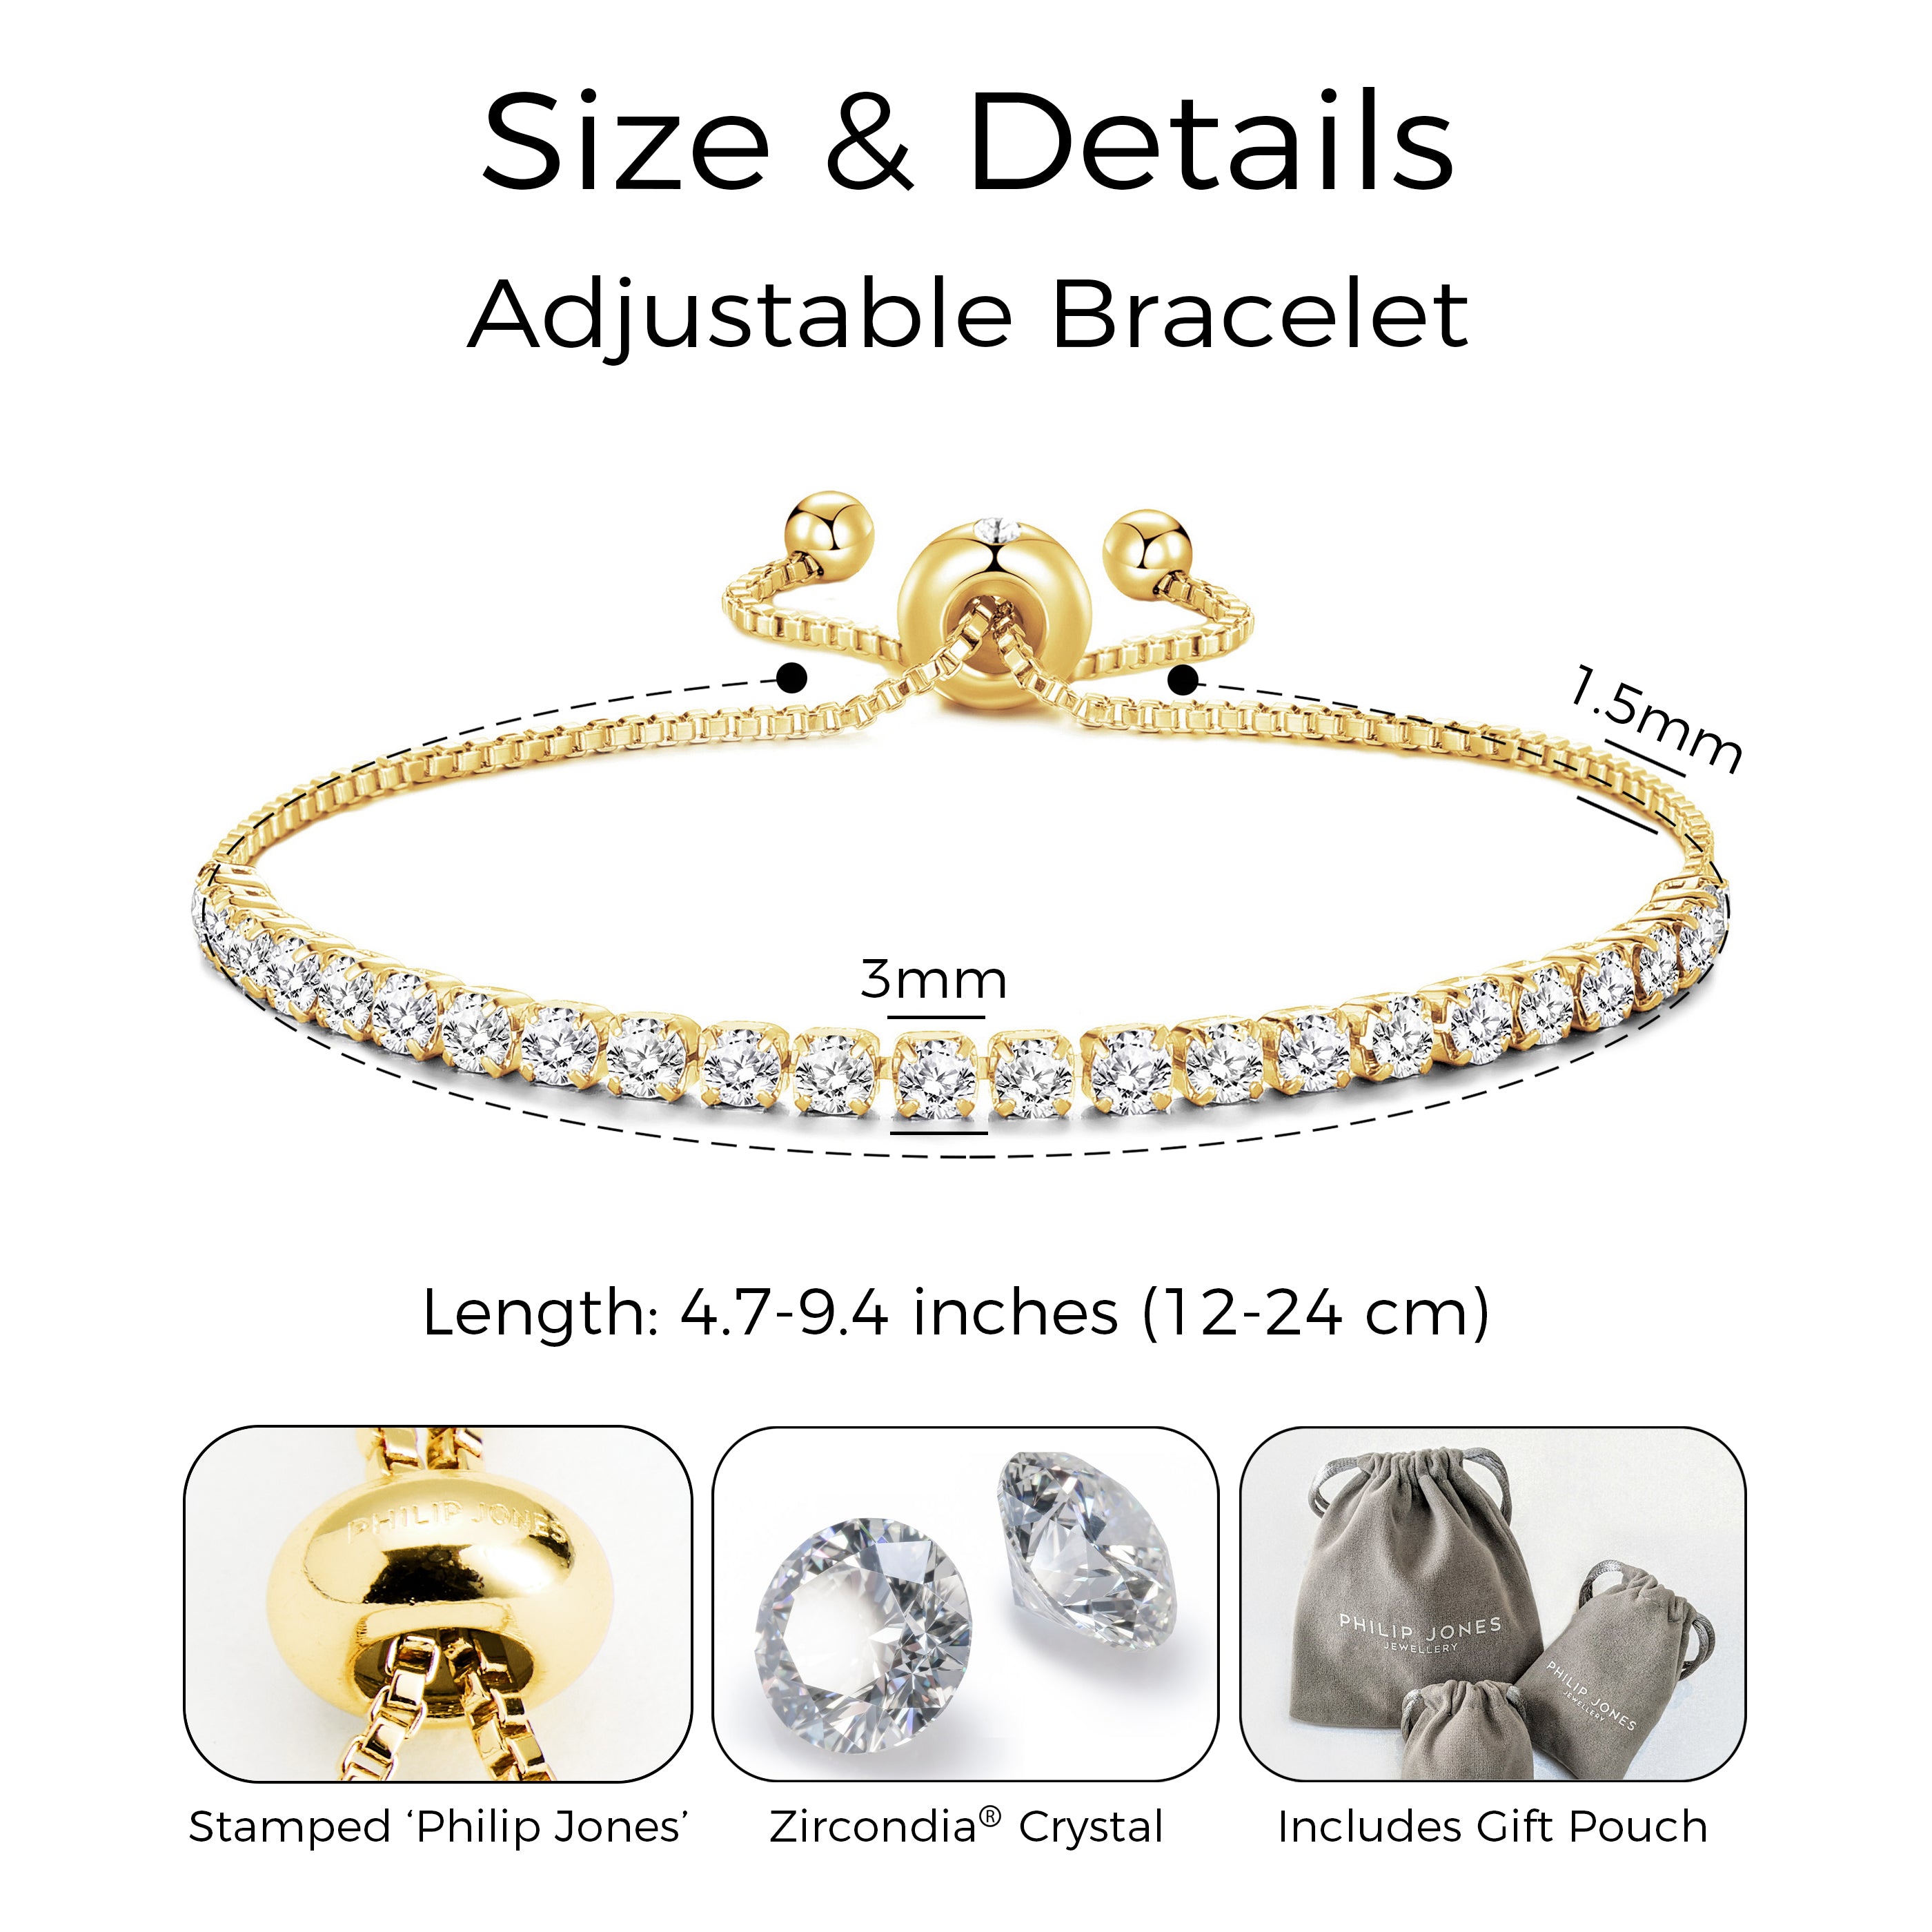 Gold Plated I Couldn't Say I Do Without You Solitaire Friendship Bracelet Created with Zircondia® Crystals